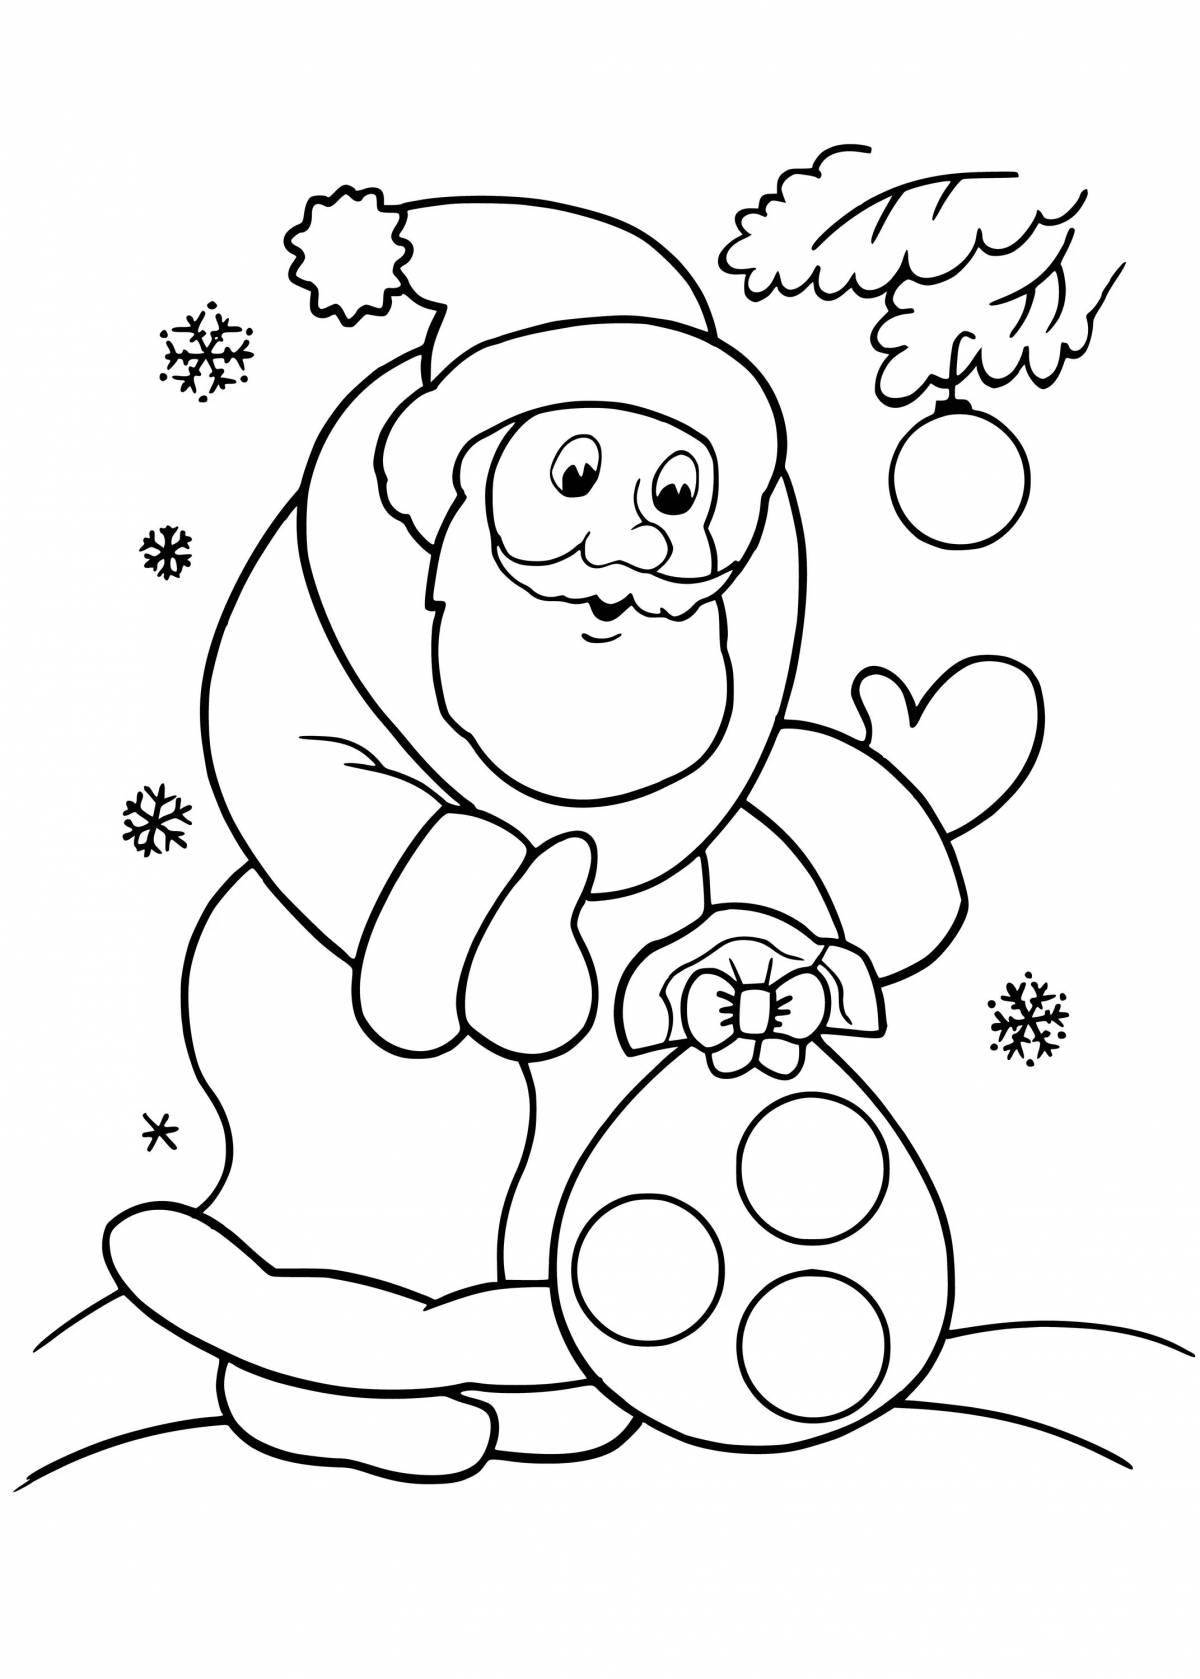 Colourful coloring book for children